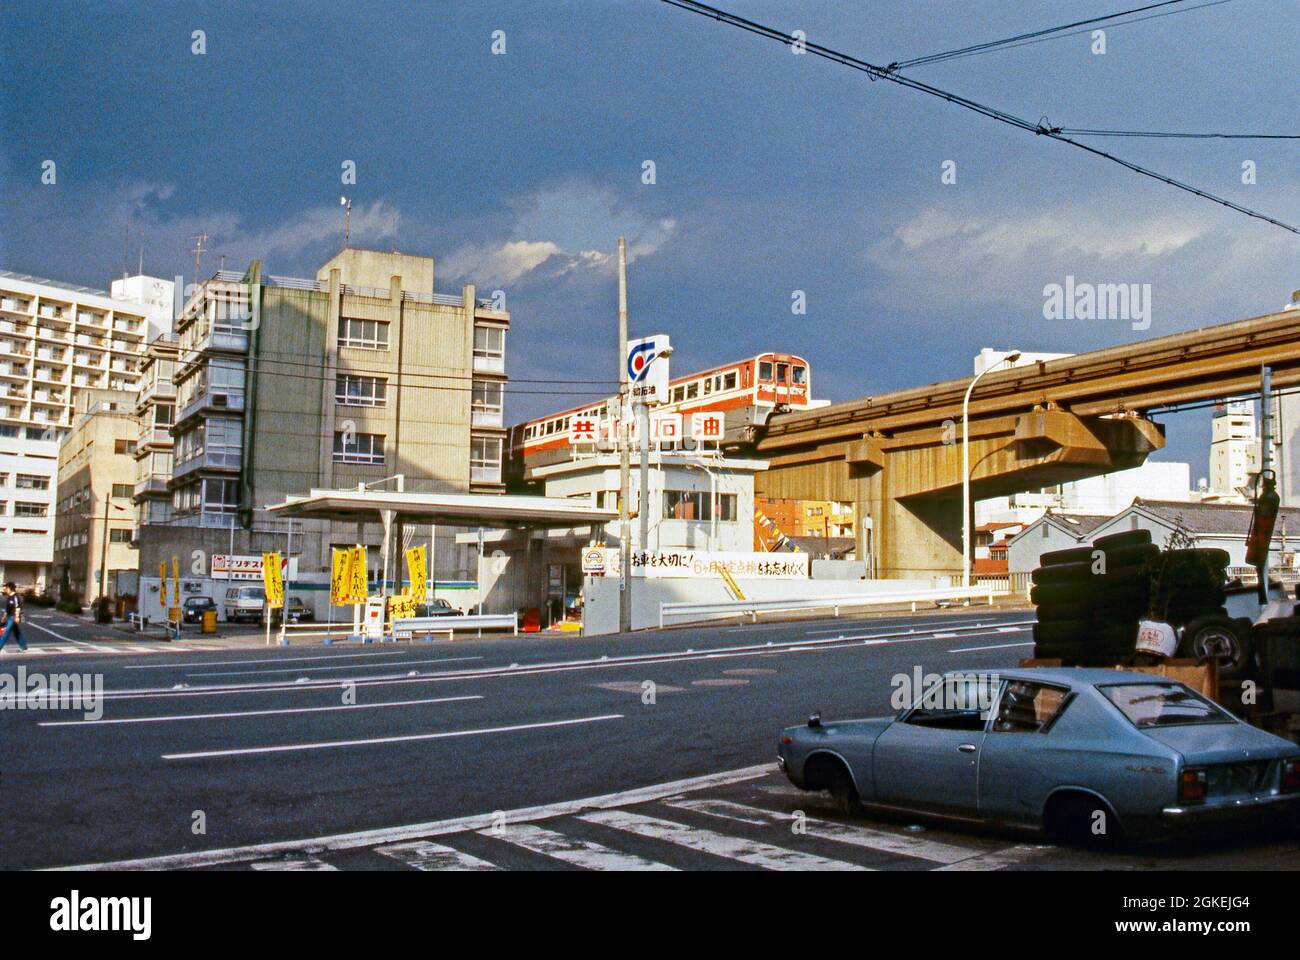 A local monorail train on the bridge above a road, Tokyo, Japan c.1982. Tokyo's monorail was opened in 1964 (to service that year's Olympic Games). It links Hamamatsucho and Hameda Airport. The trains were built by Hitachi to the German ALWEG design. It is considered to be the world's busiest (and most profitable) monorail. A gas/petrol station is on the street below. This image is from an amateur photographer’s Agfa colour transparency – a vintage 1980s photograph. Stock Photo